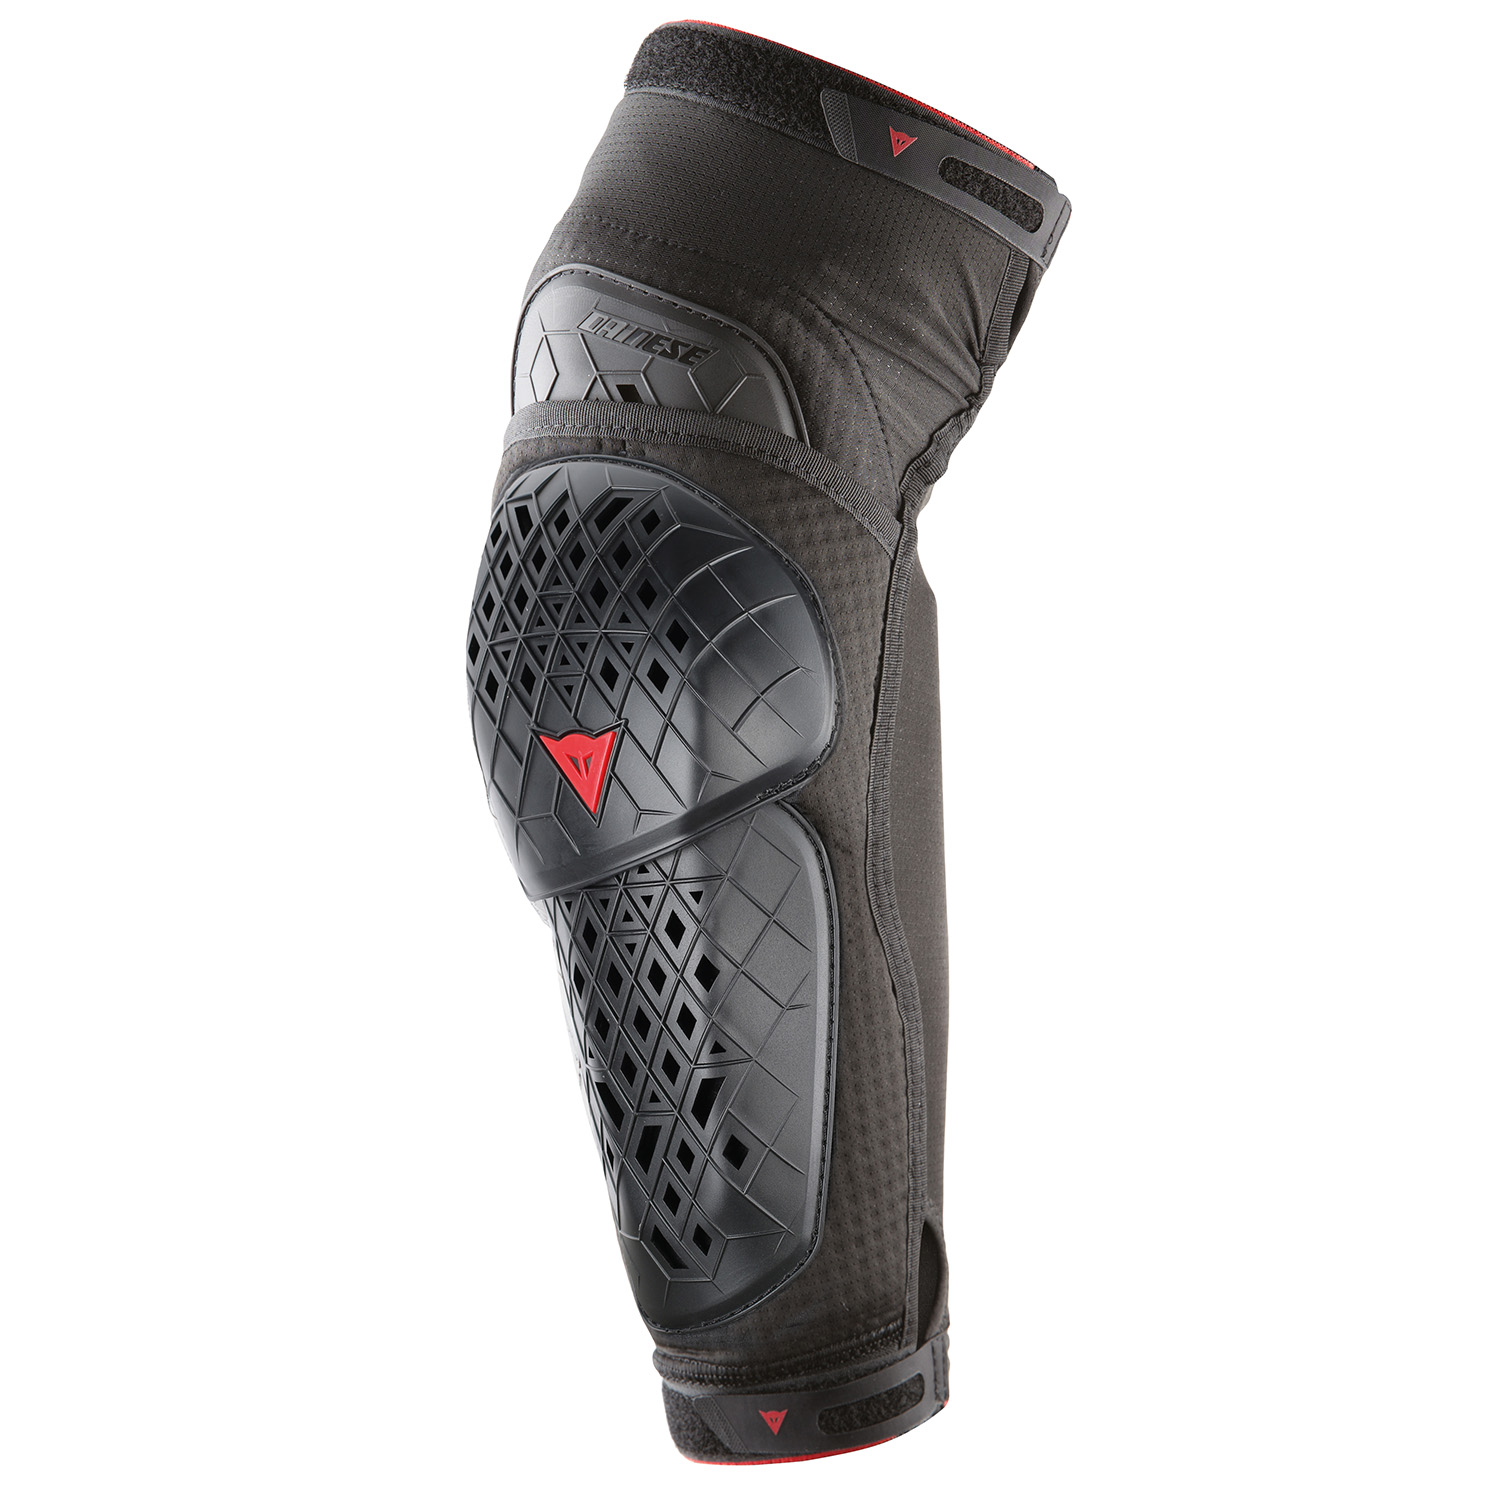 Dainese Armoform Elbow Guards | Merlin Cycles